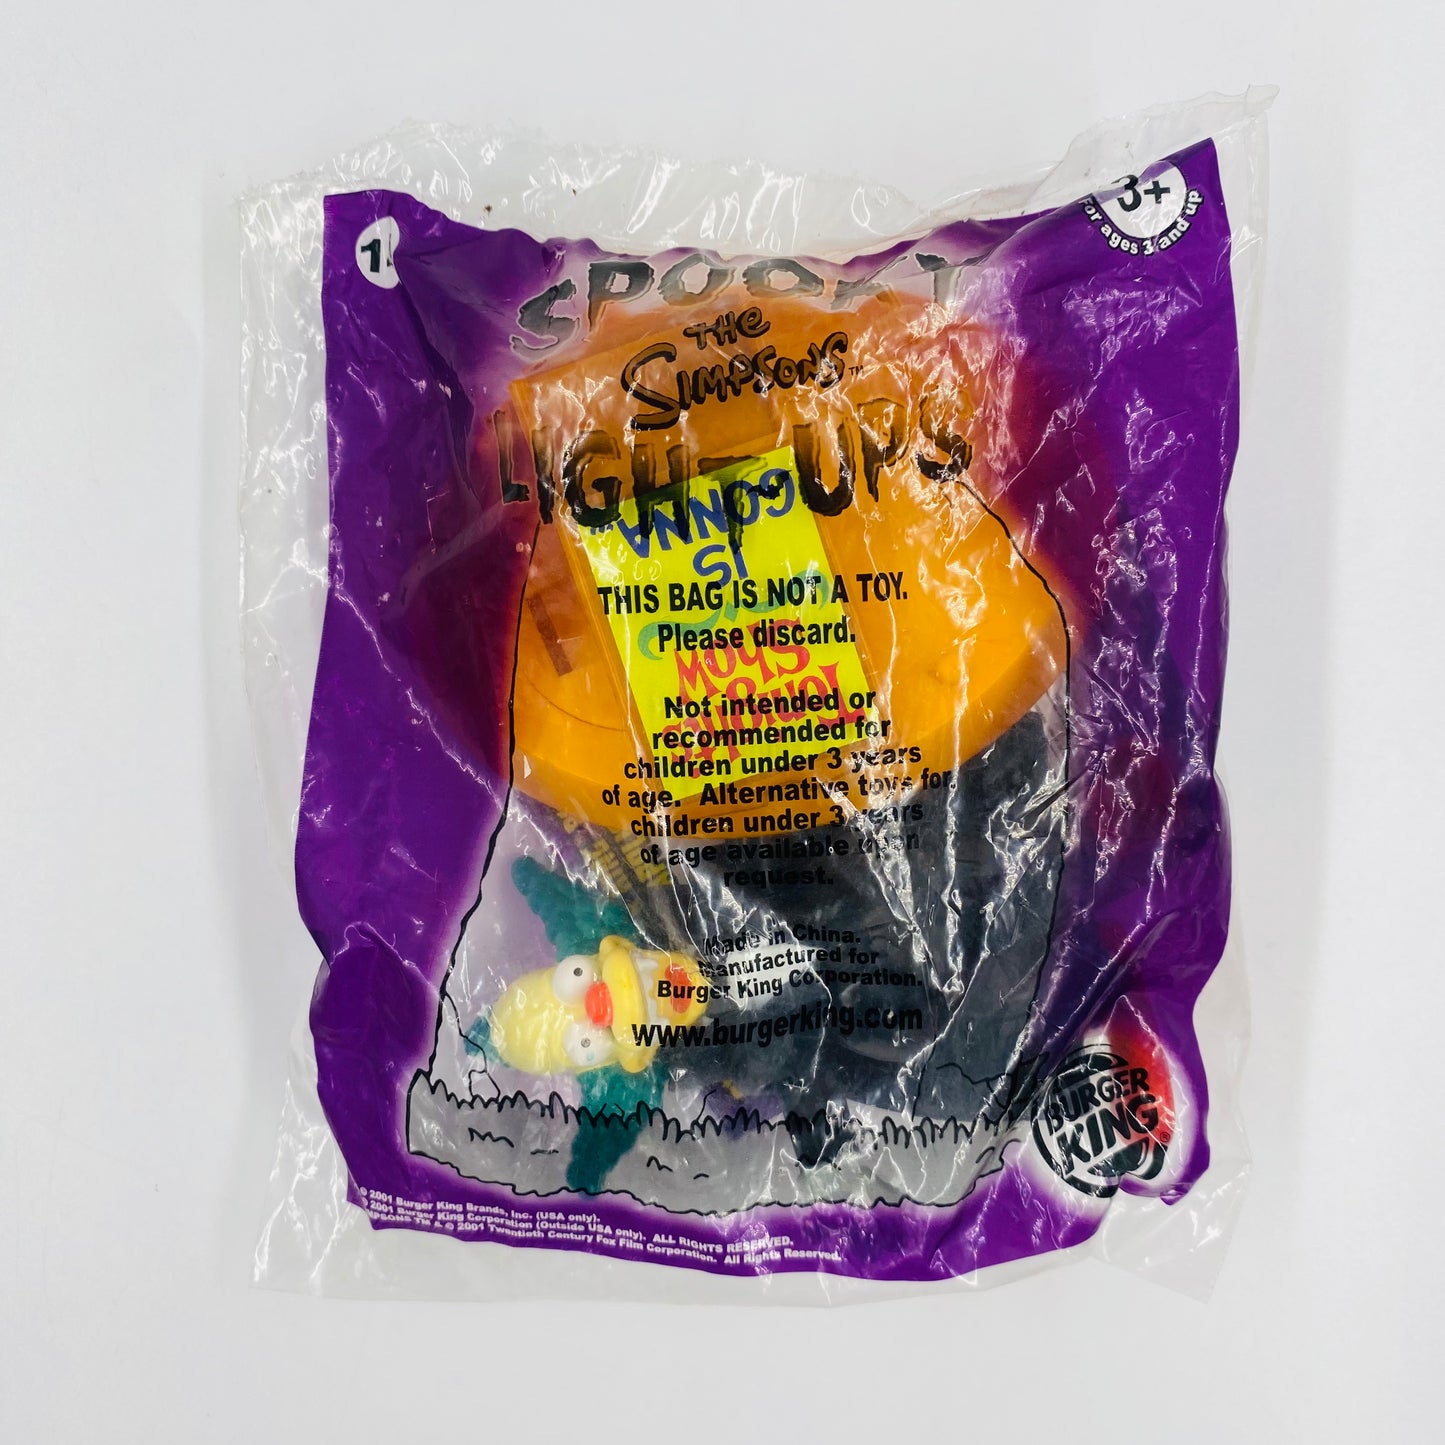 The Simpsons Spooky Light-Ups Krusty Burger King Kids' Meals toy (2001) bagged